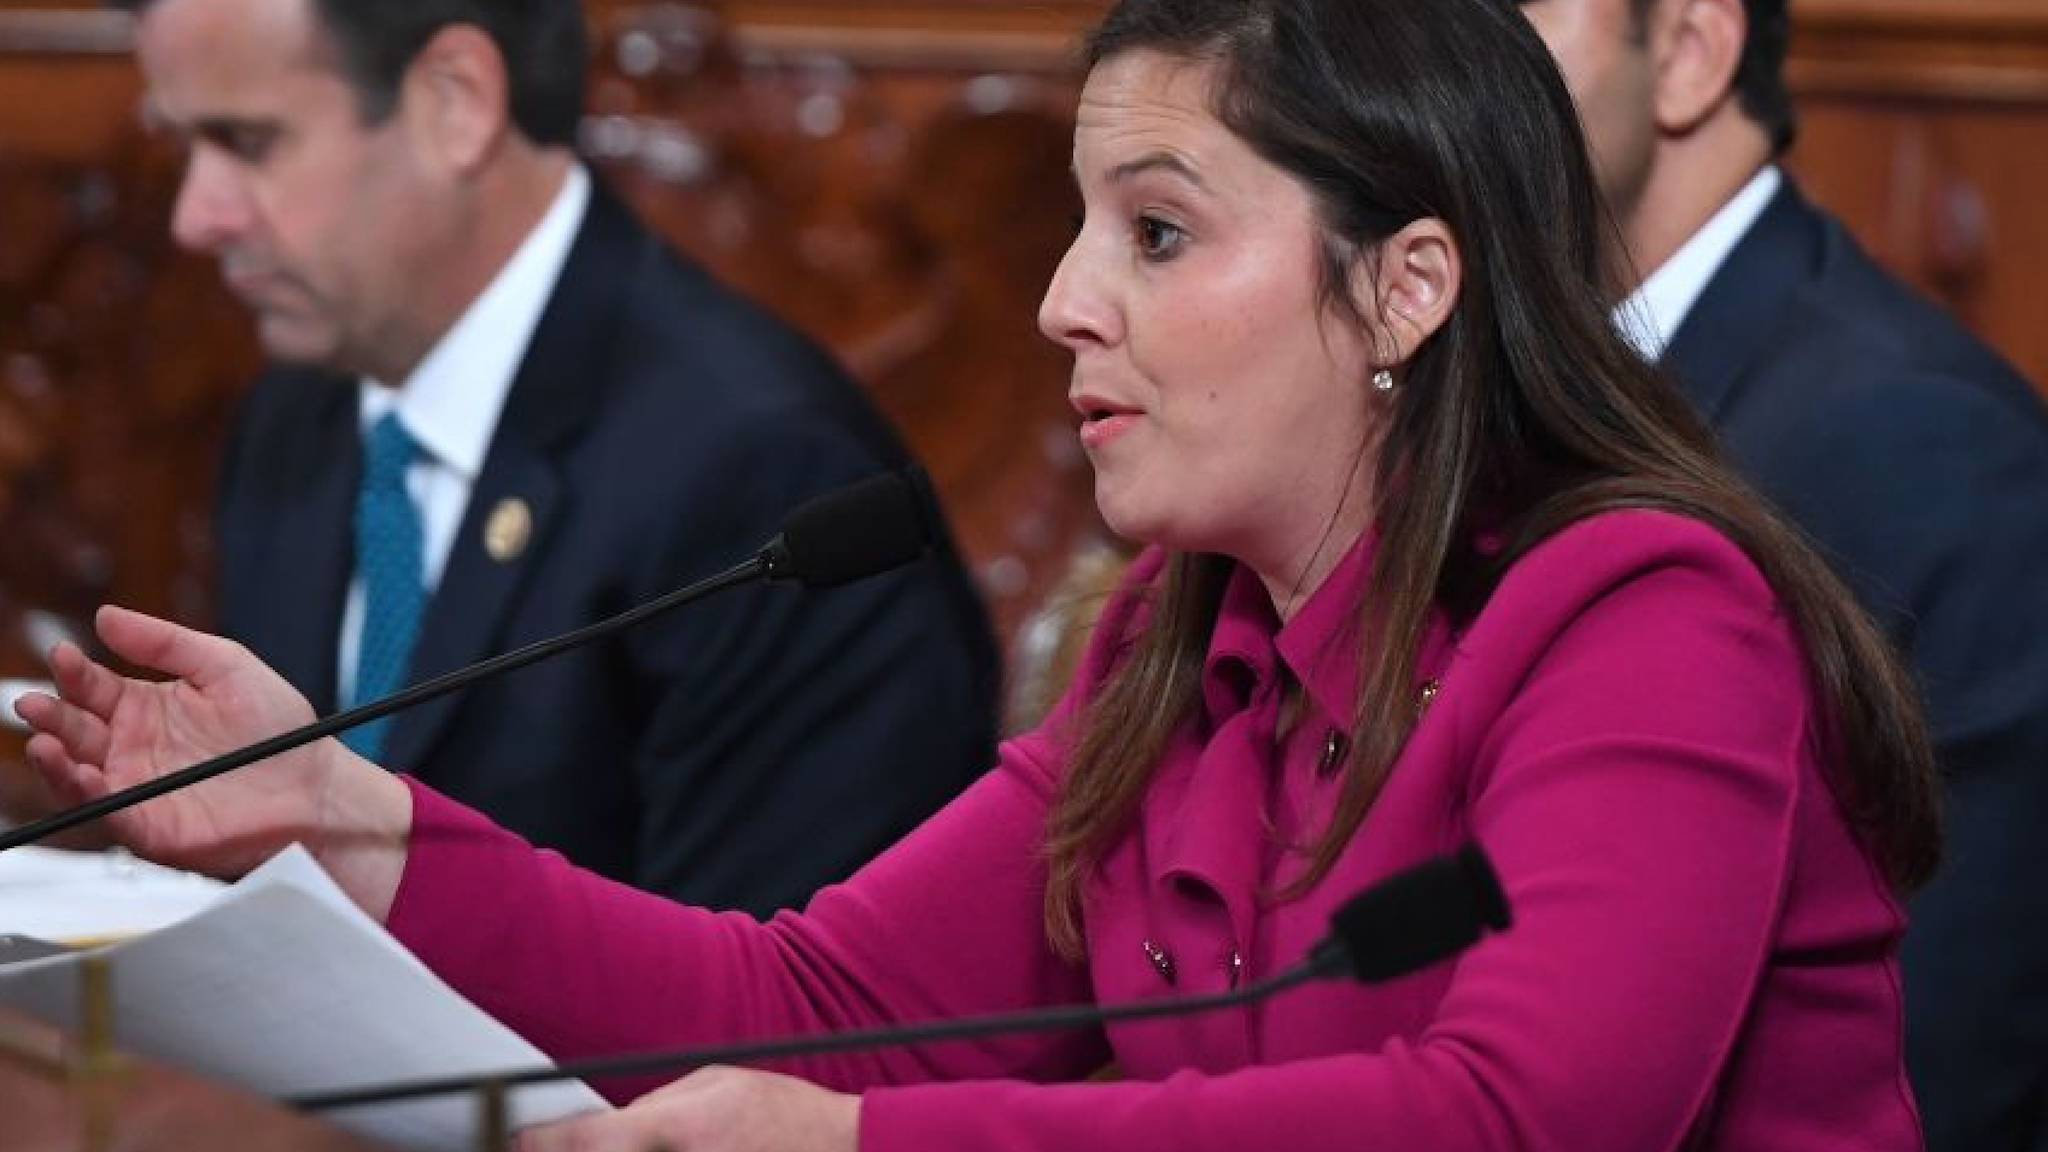 US Representative Elise Stefanik (R-NY) speaks as former US Ambassador to the Ukraine Marie Yovanovitch testifies before the House Permanent Select Committee on Intelligence as part of the impeachment inquiry into US President Donald Trump, on Capitol Hill on November 15, 2019 in Washington DC.